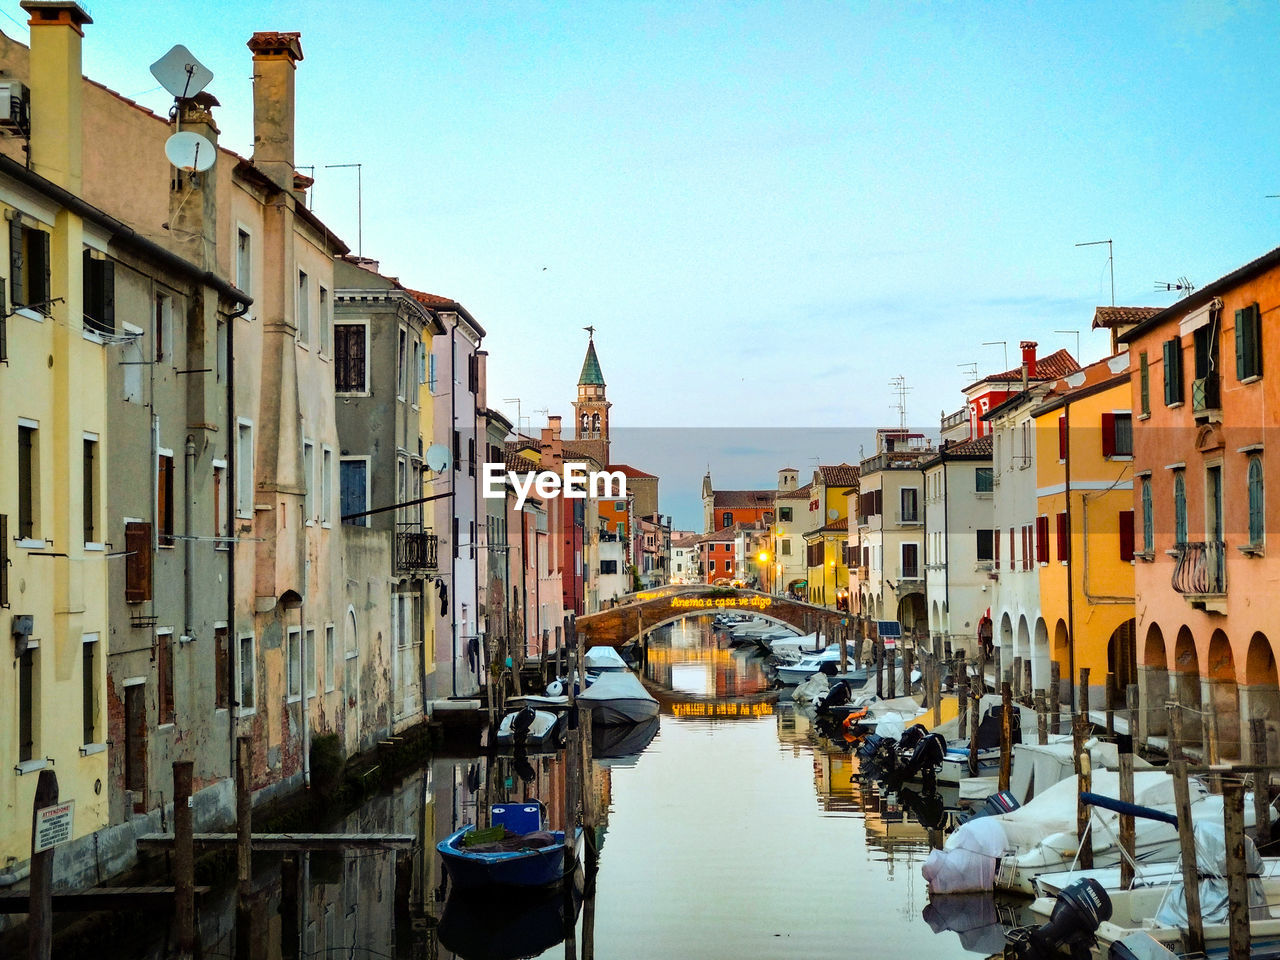 architecture, canal, building exterior, water, built structure, nautical vessel, gondola, transportation, travel destinations, waterway, city, mode of transportation, town, travel, nature, tourism, body of water, sky, building, boat, cityscape, vehicle, bridge, channel, watercraft, gondolier, clear sky, day, residential district, outdoors, trip, vacation, moored, holiday, no people, waterfront, old, reflection, sunlight